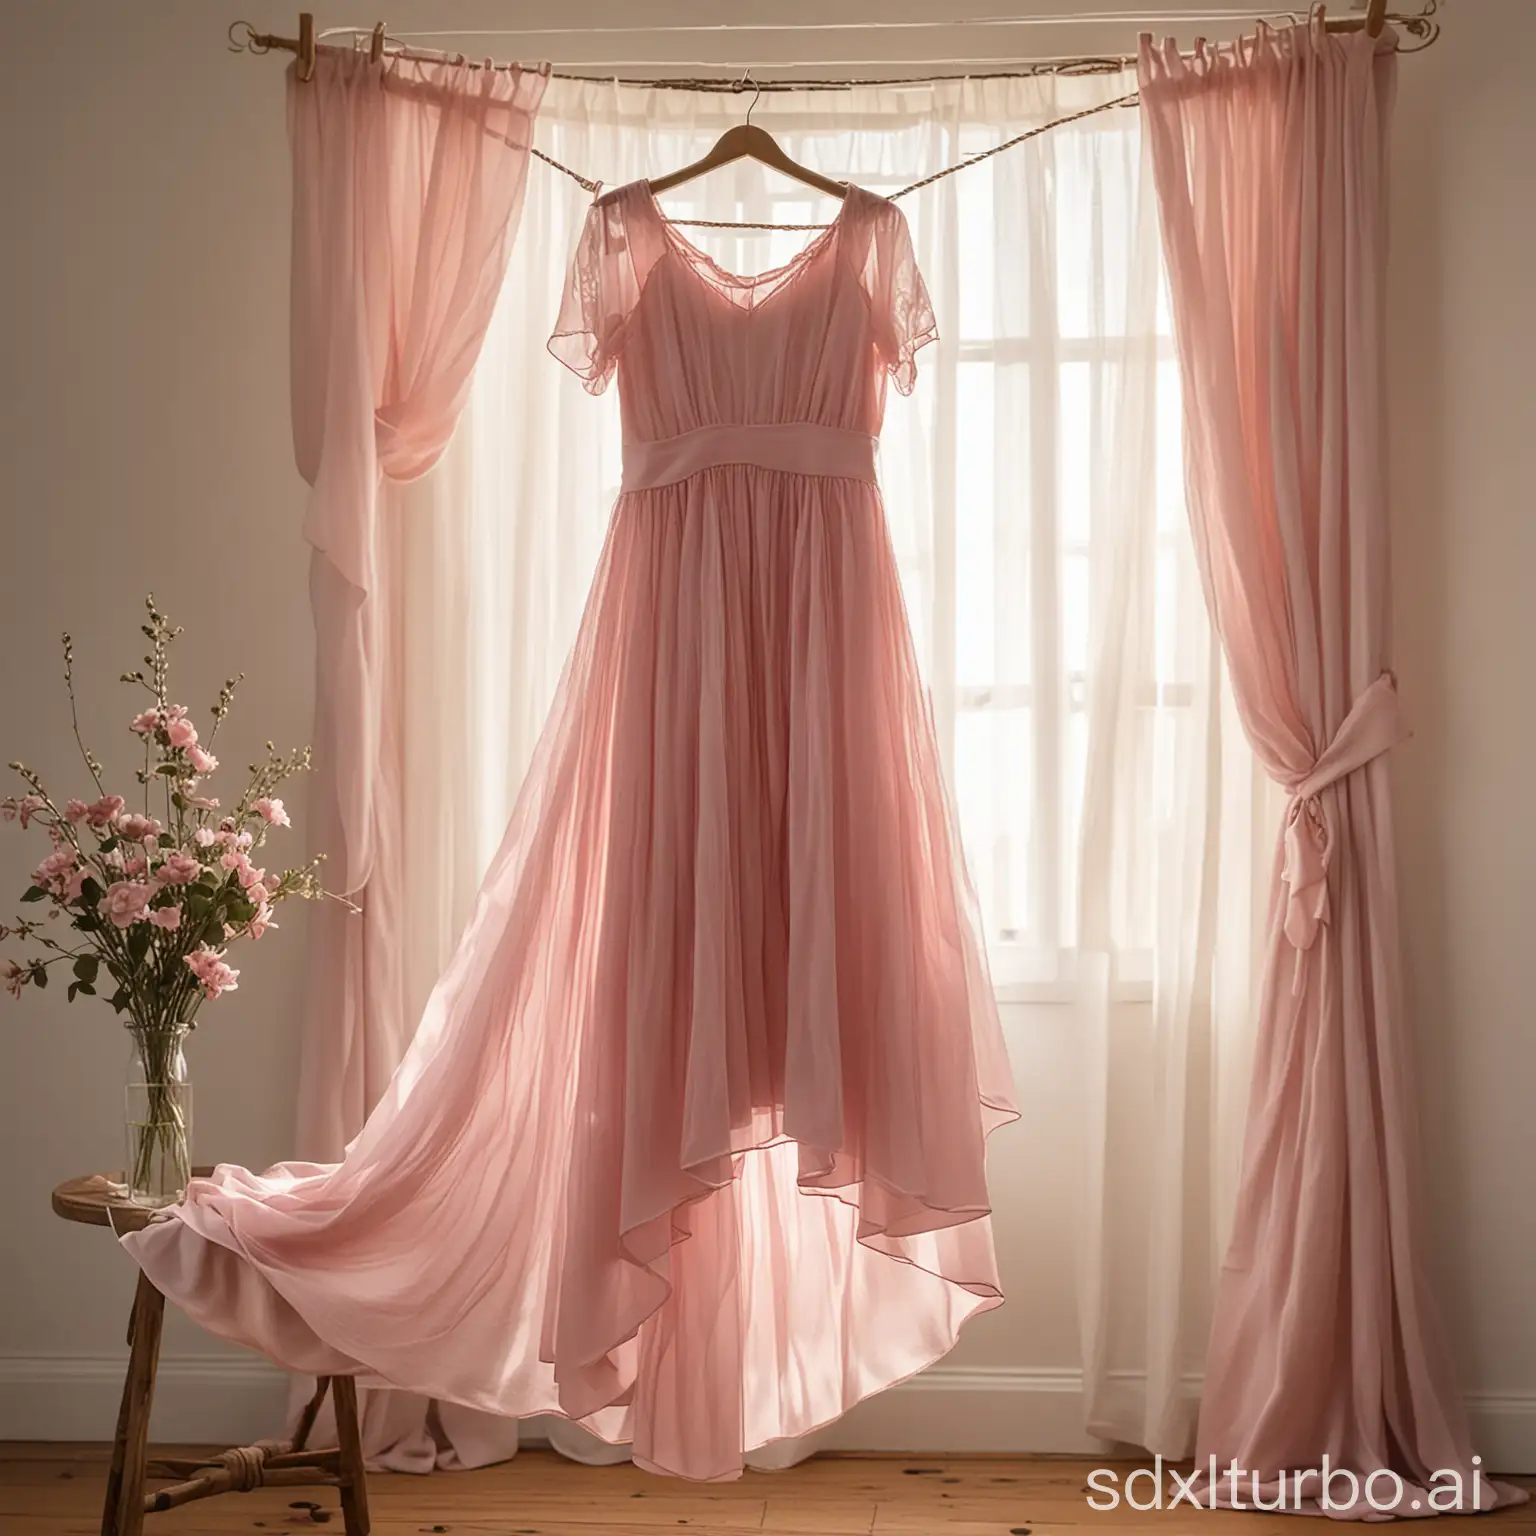 A beautiful pink dress hanging on a clothesline. The dress has a long, flowing silhouette and is made of a sheer fabric. The light shines through the fabric, creating a soft, ethereal look.